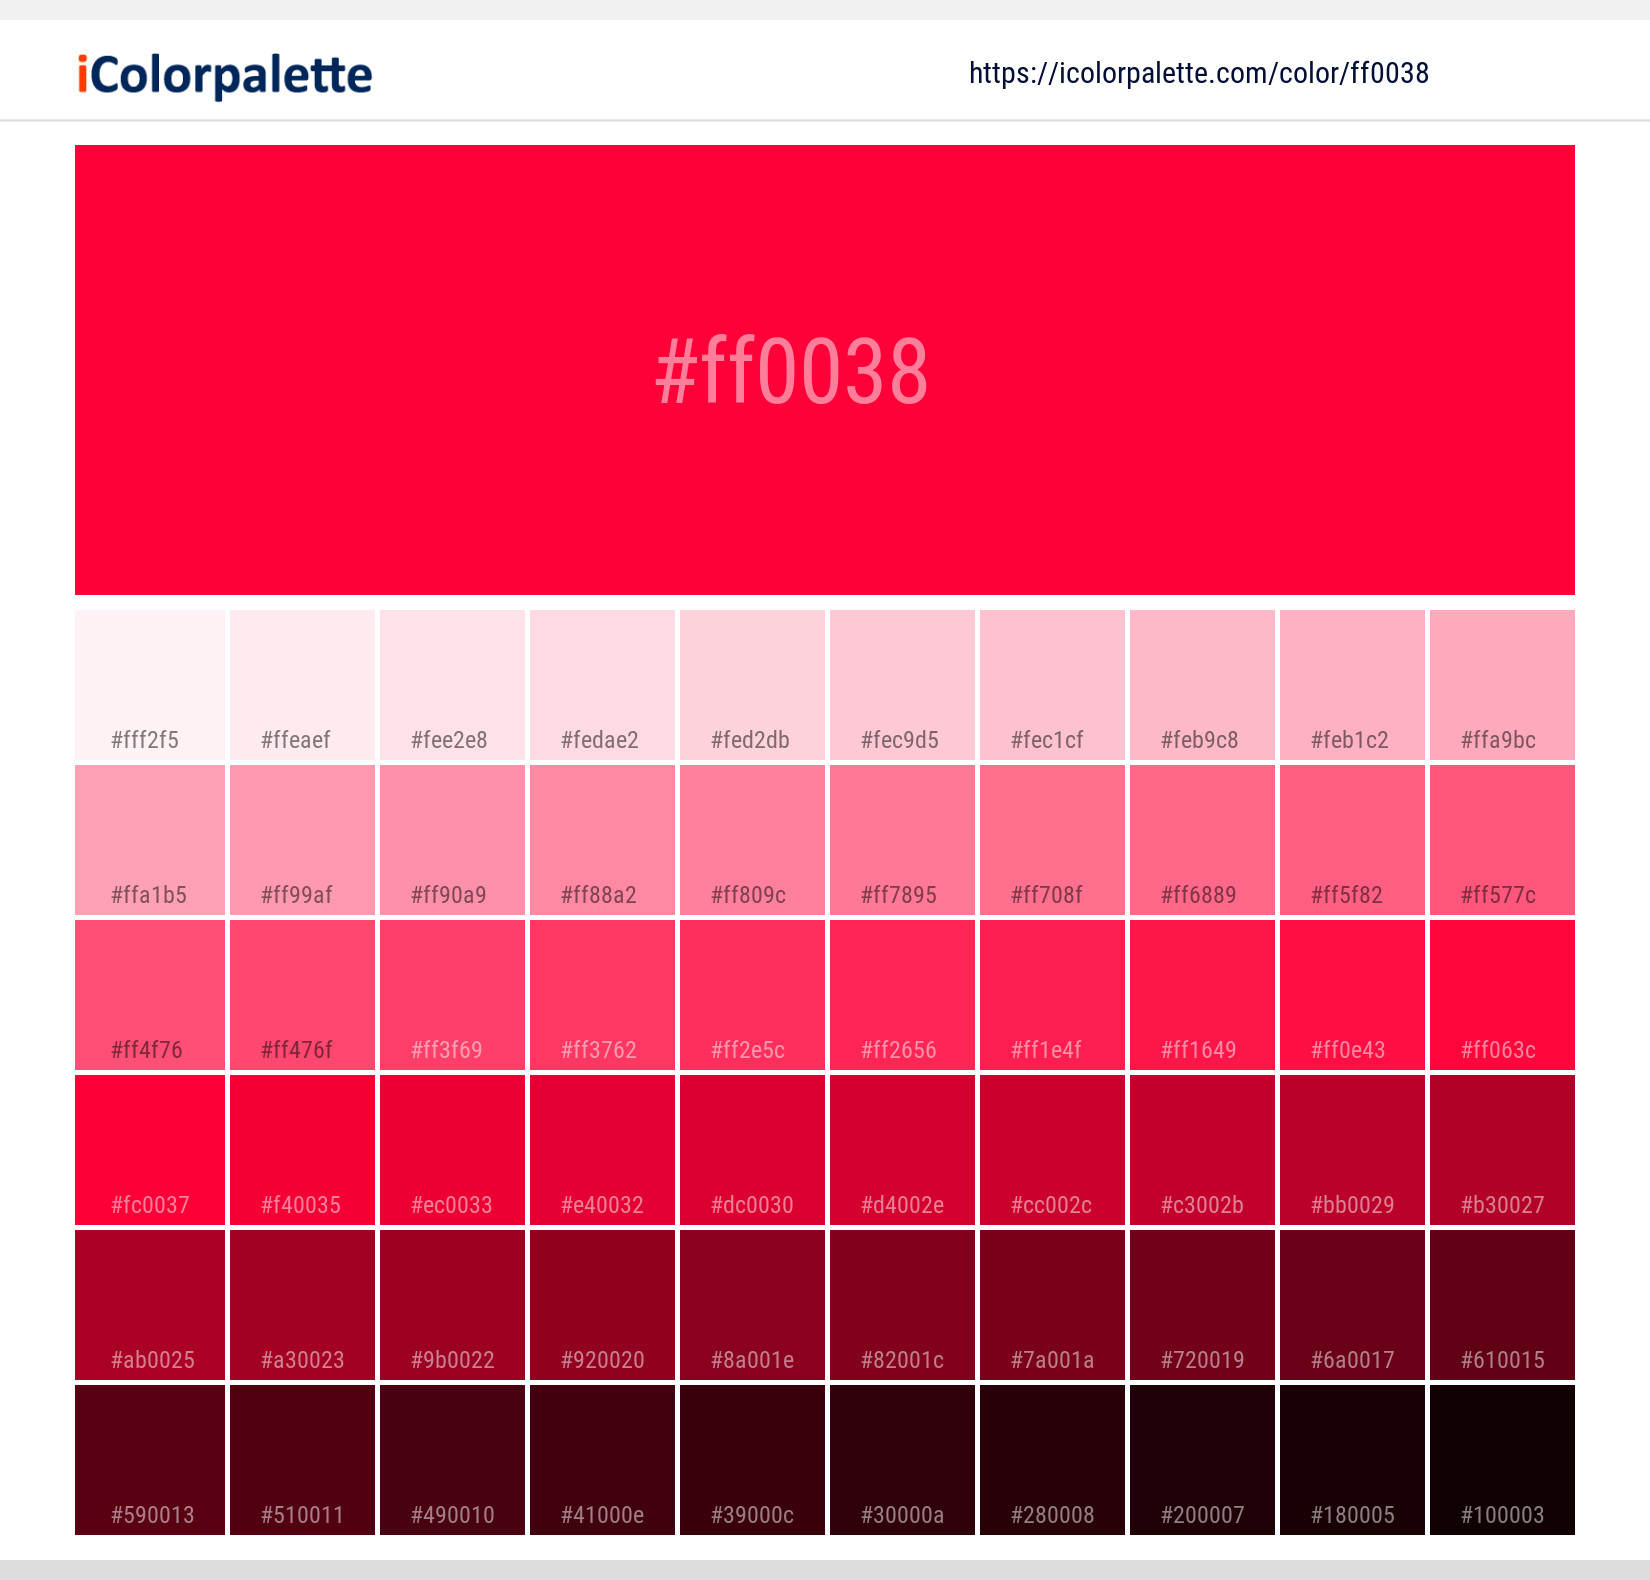 https://www.icolorpalette.com/download/shades/ff0038_color_shades.jpg